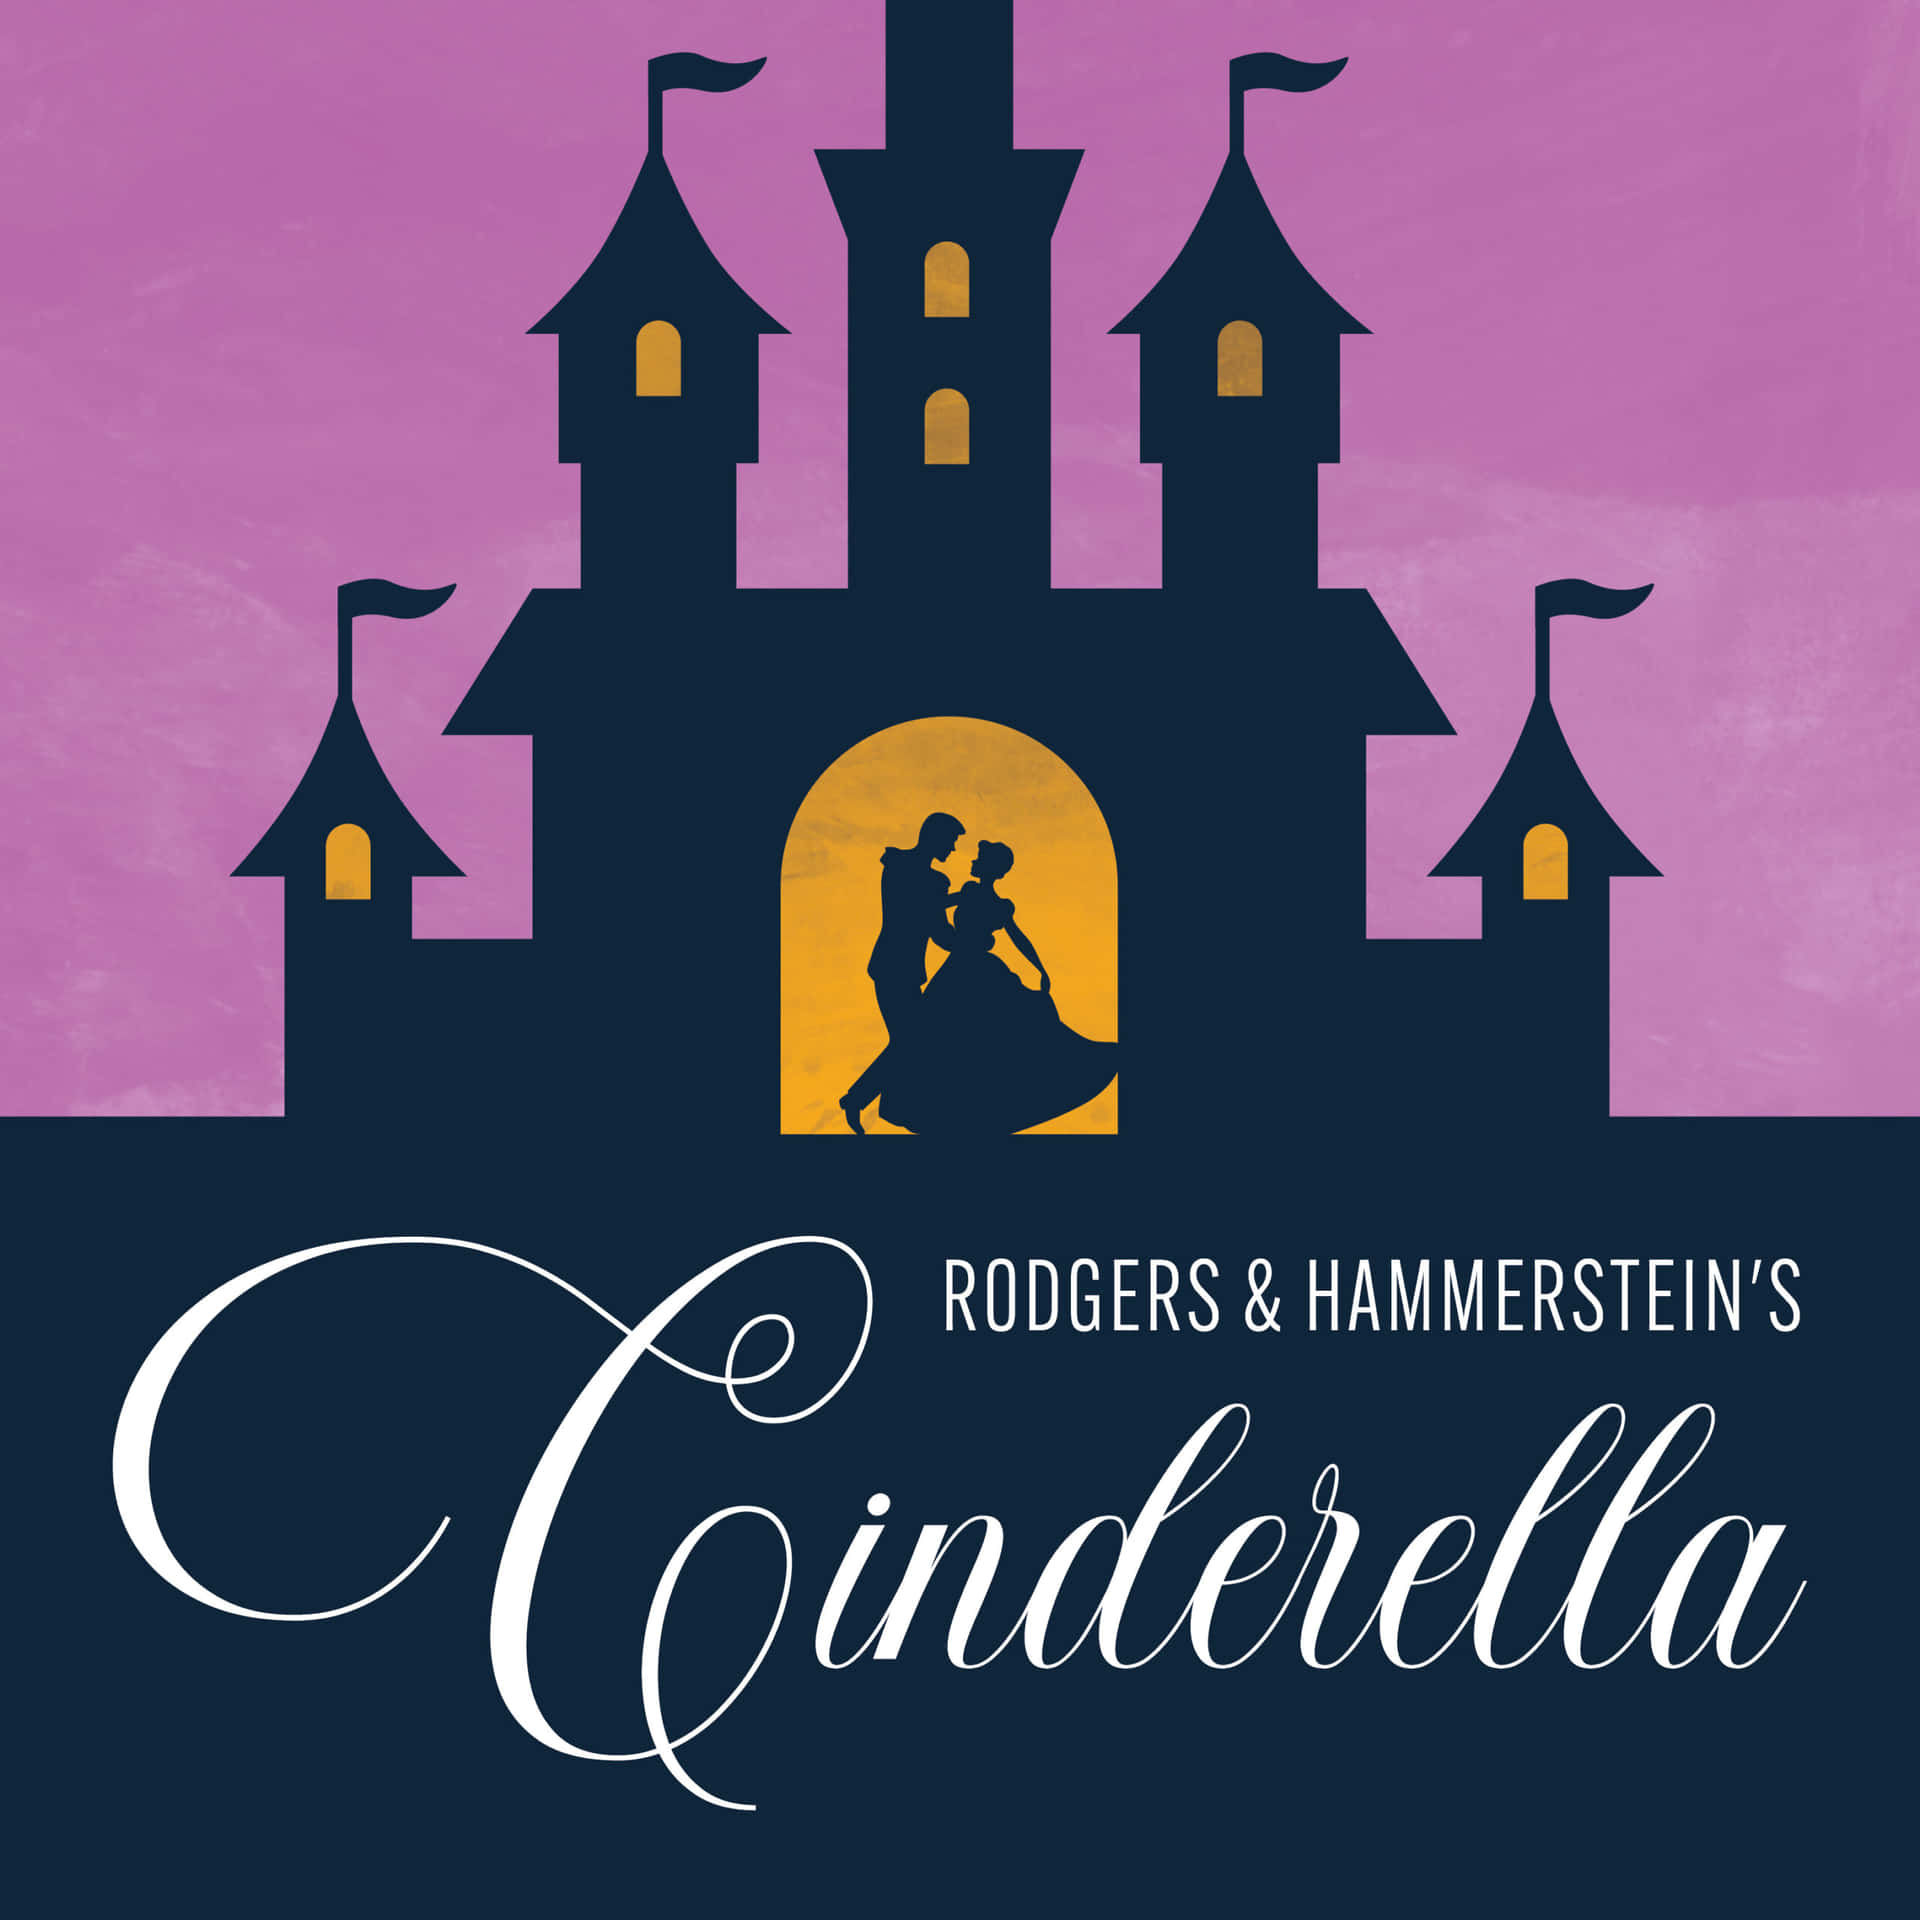 "Cinderella, dreaming of her Fairy Godmother"